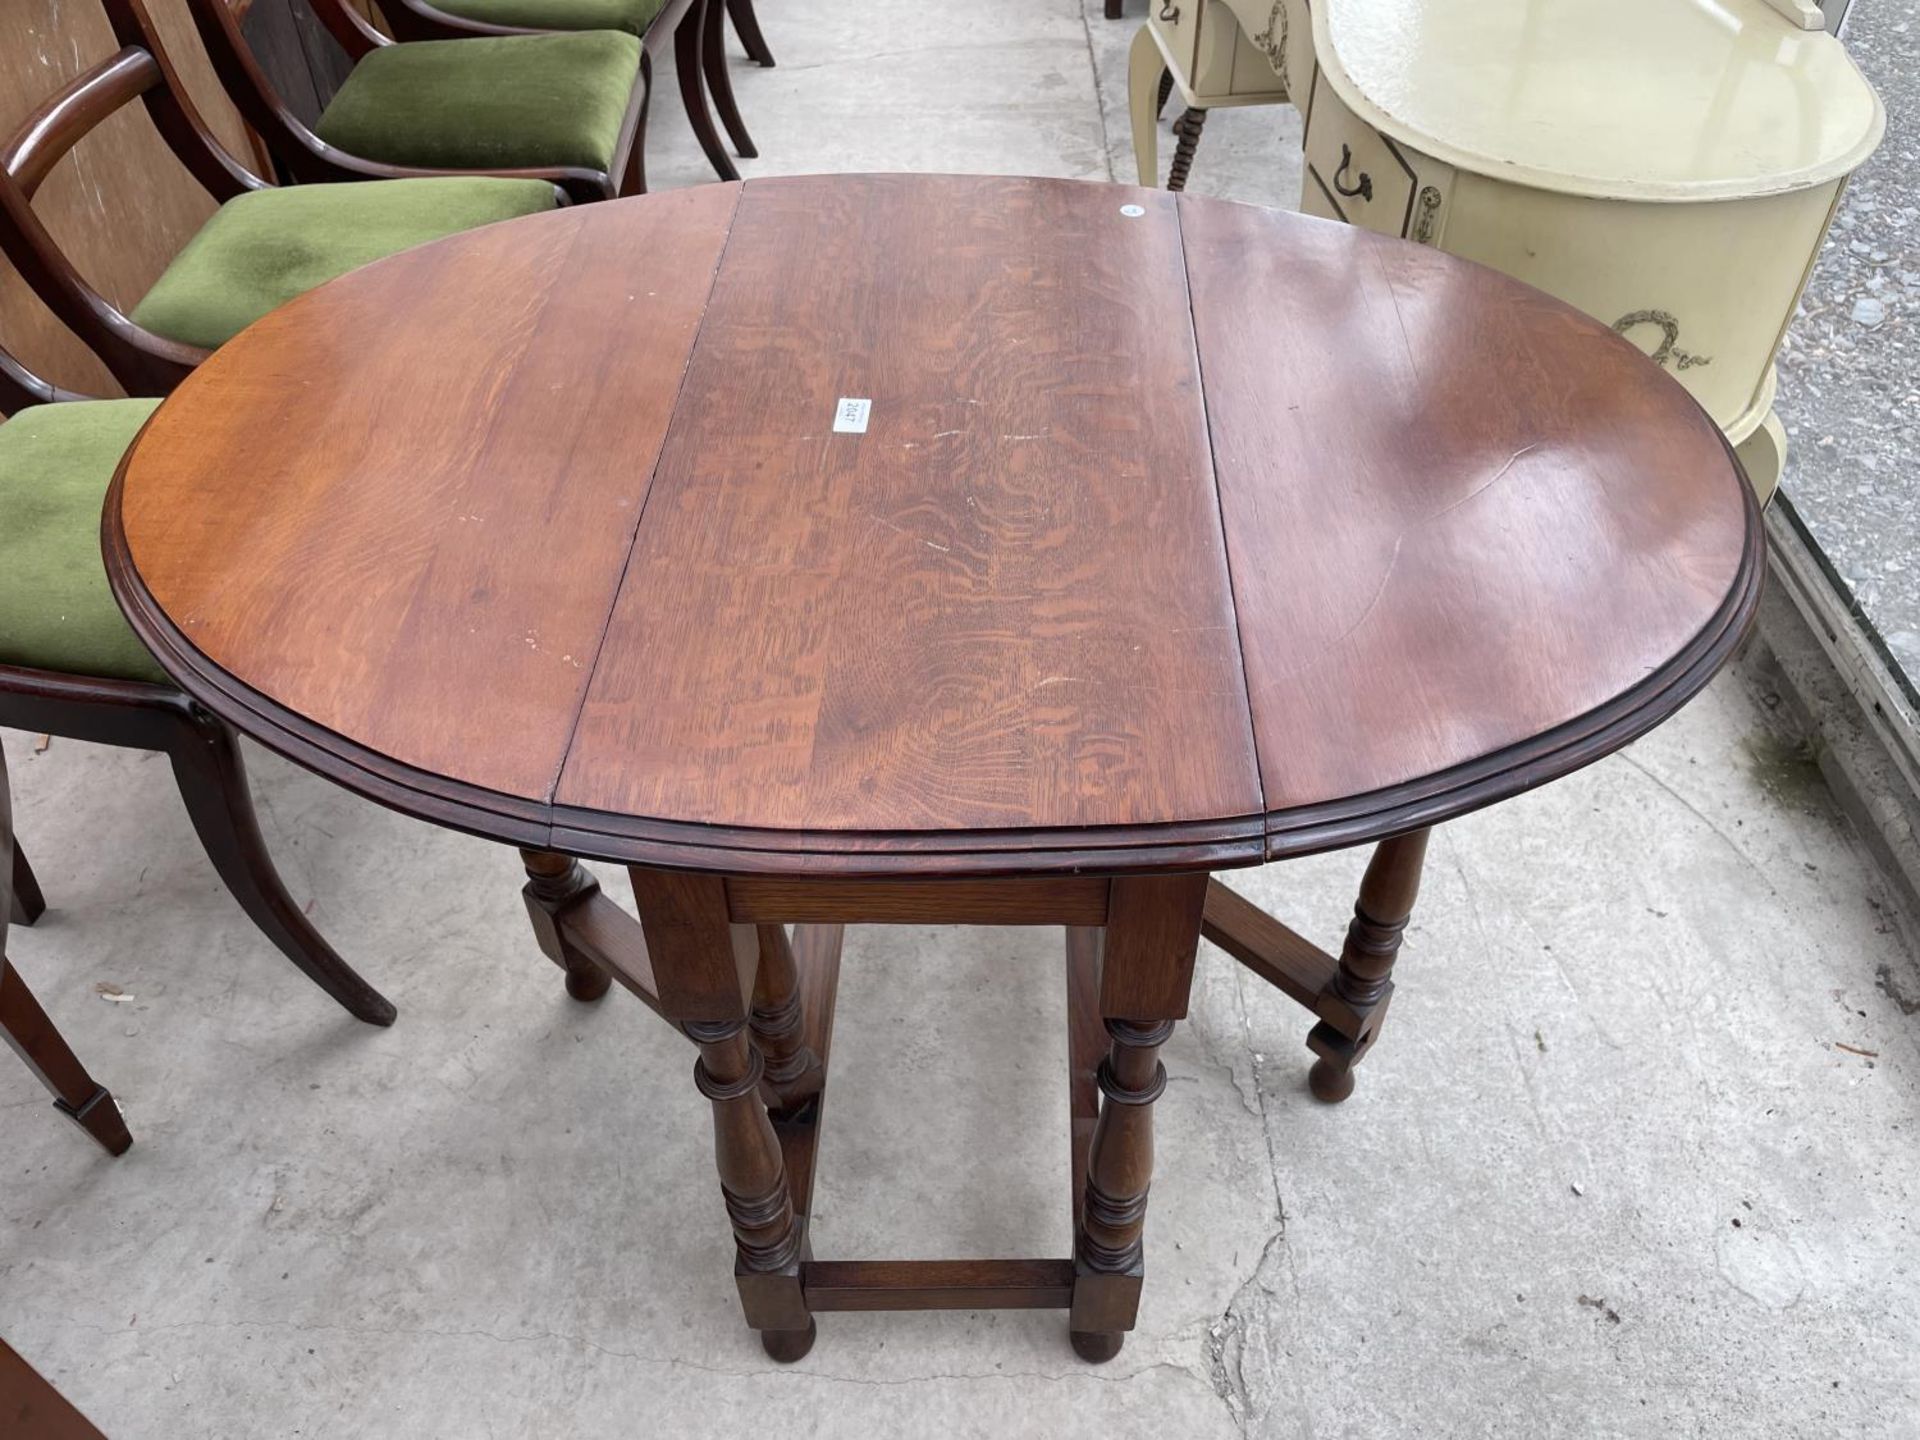 AN EARLY 20TH CENTURY OVAL OAK DINING TABLE ON TURNED LEGS, 30X42"